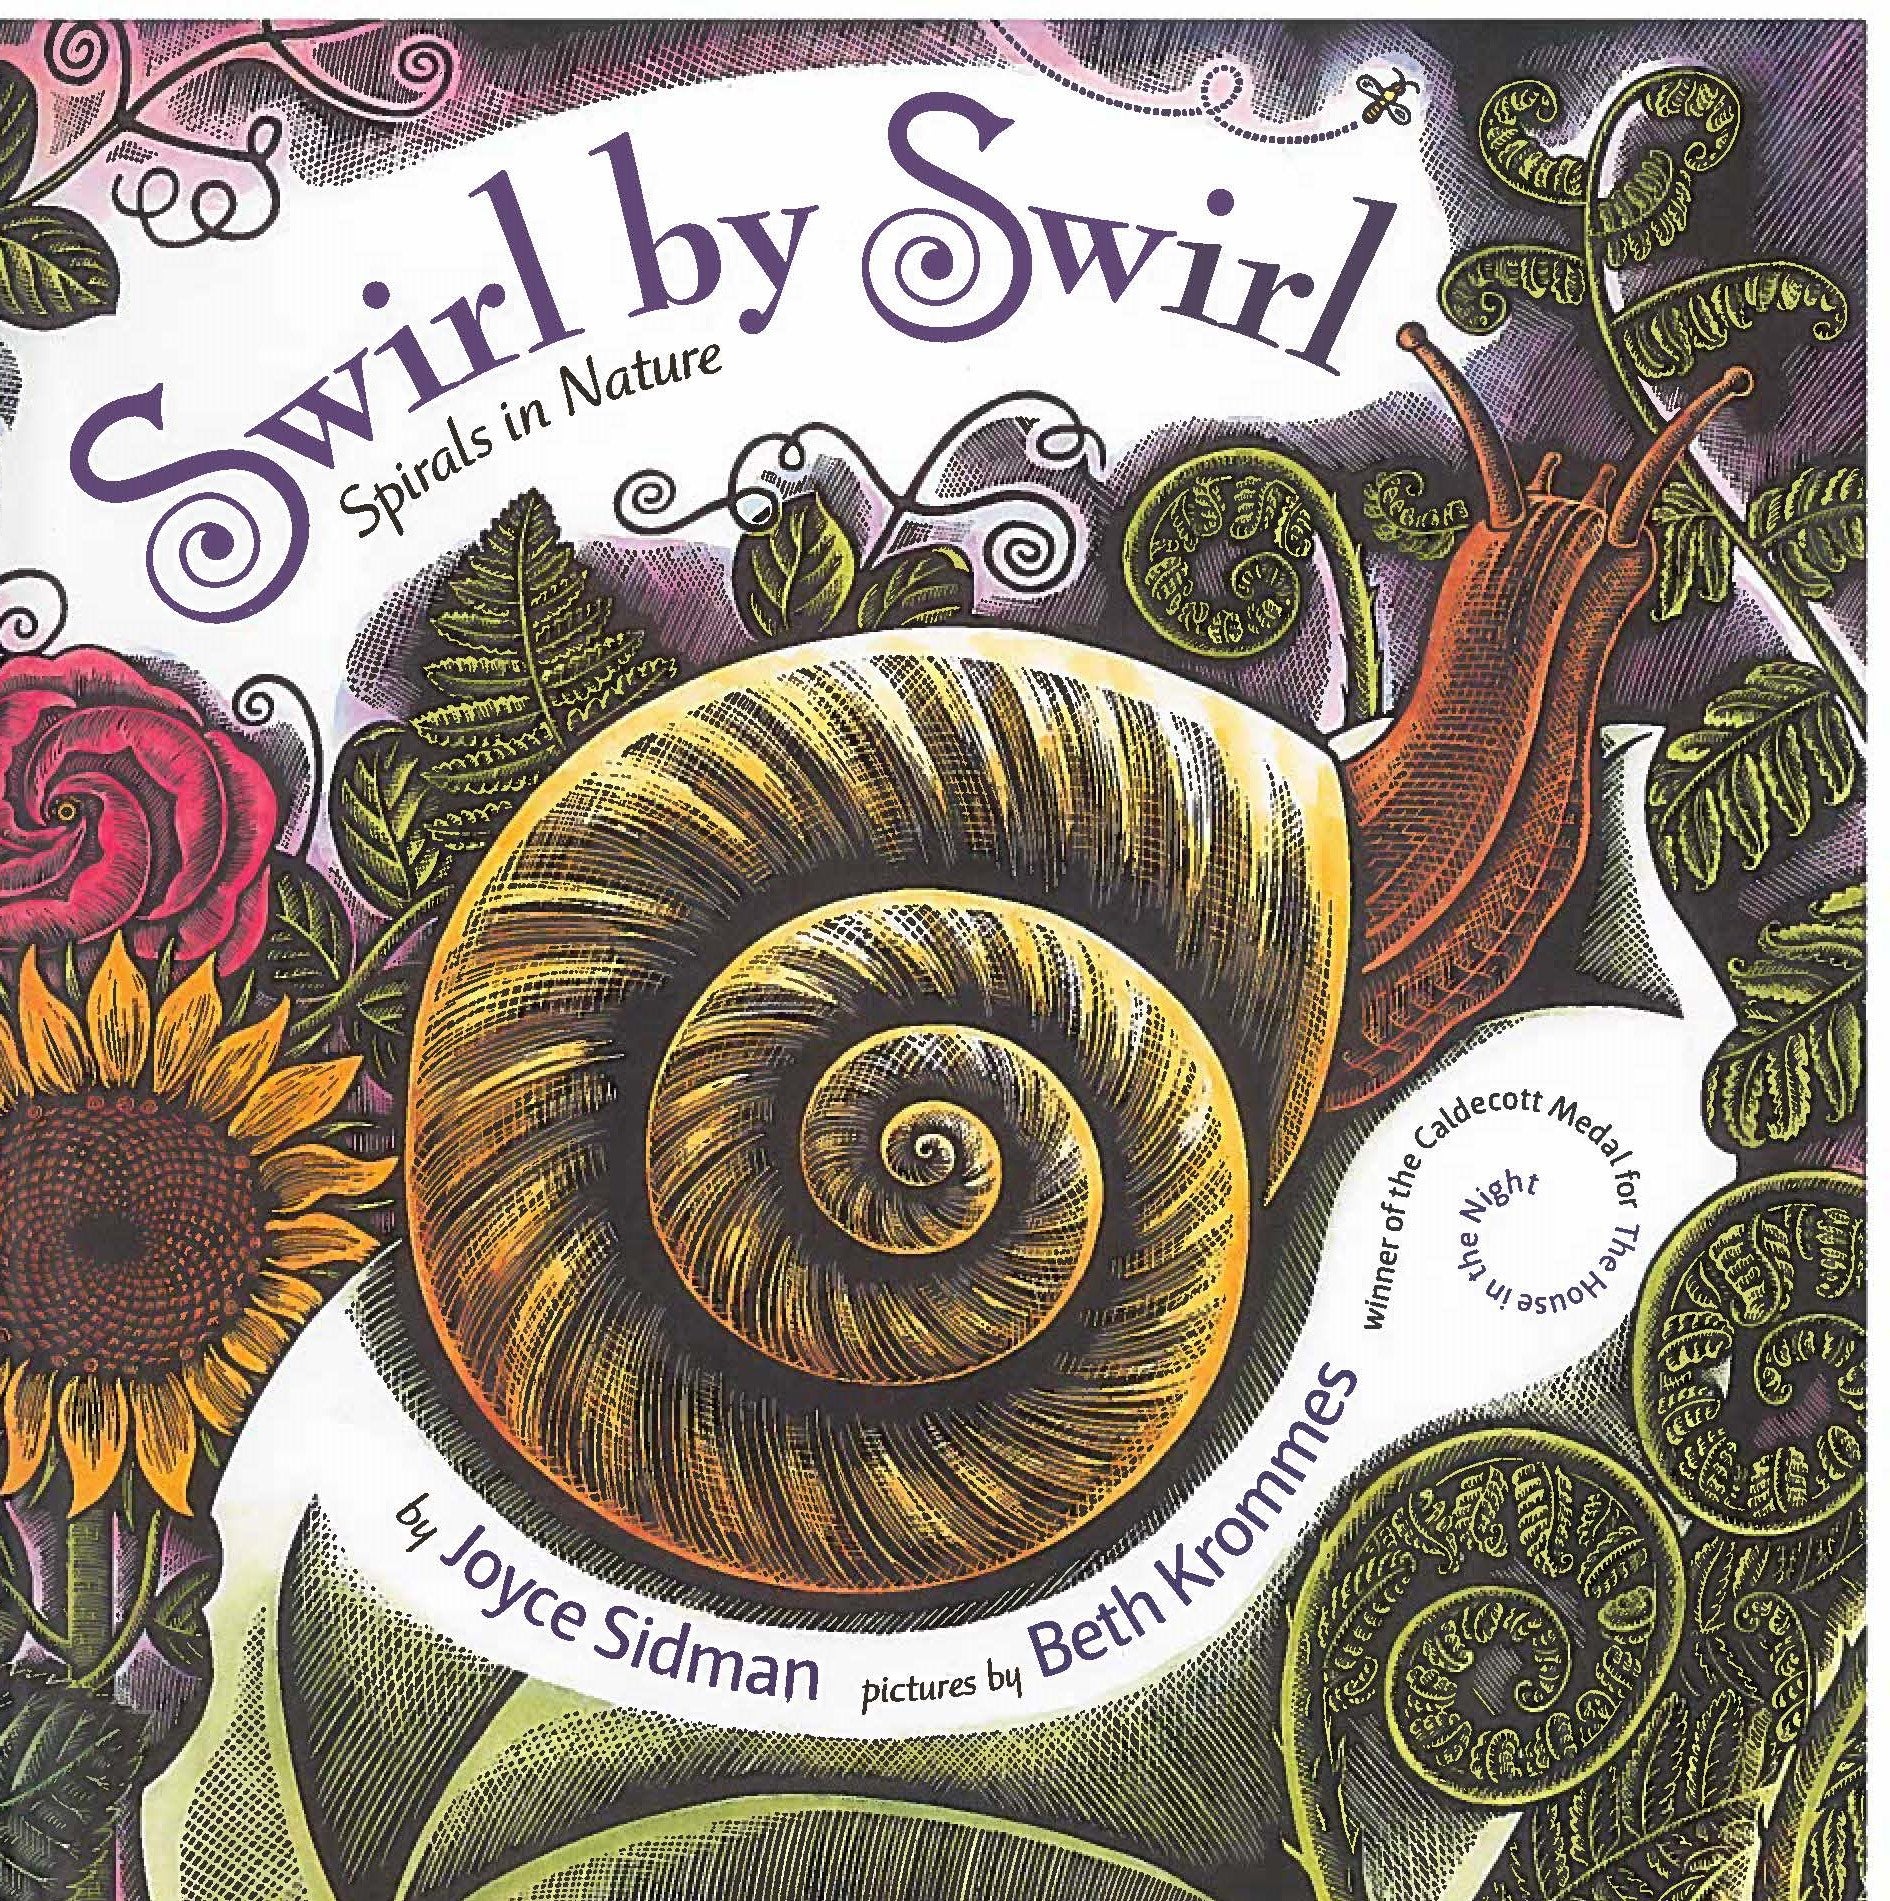 Swirl by Swirl book cover, showing a photo of a colorful snail surrounded by flowers